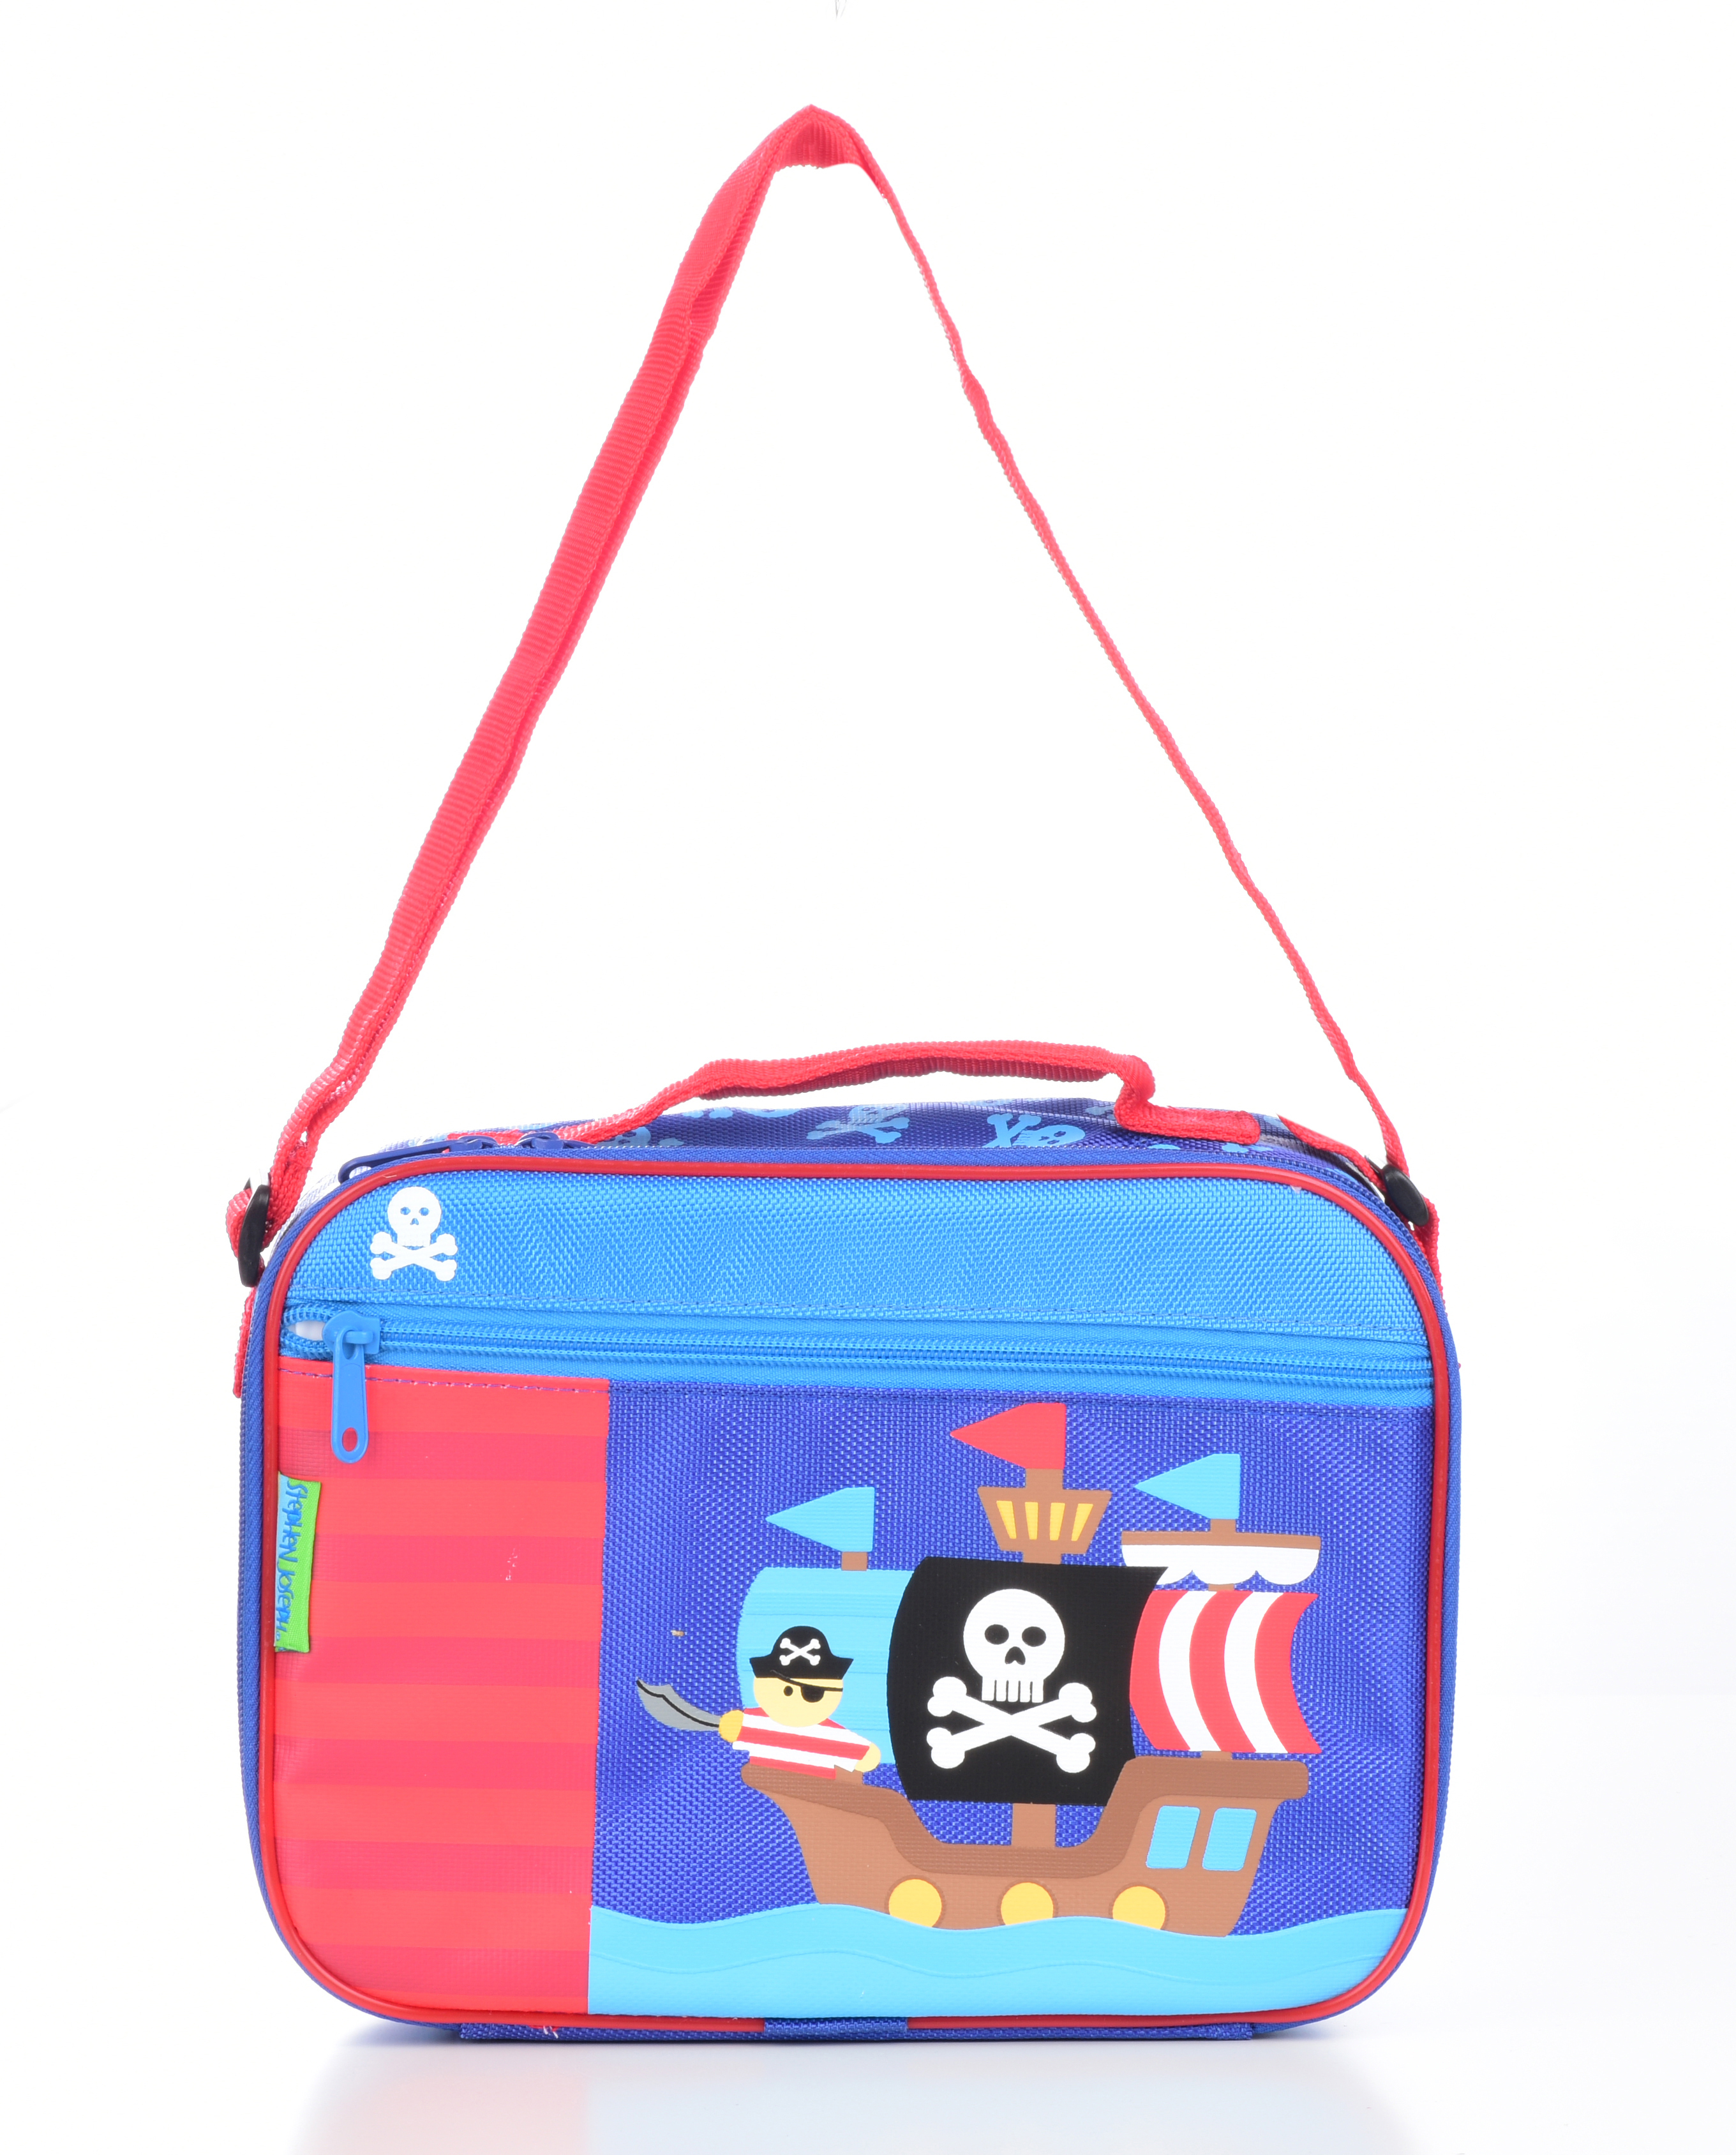 Stephen Joseph Classic Lunch Box with Crossbody Strap, Pirate Blue, One Size - image 1 of 1